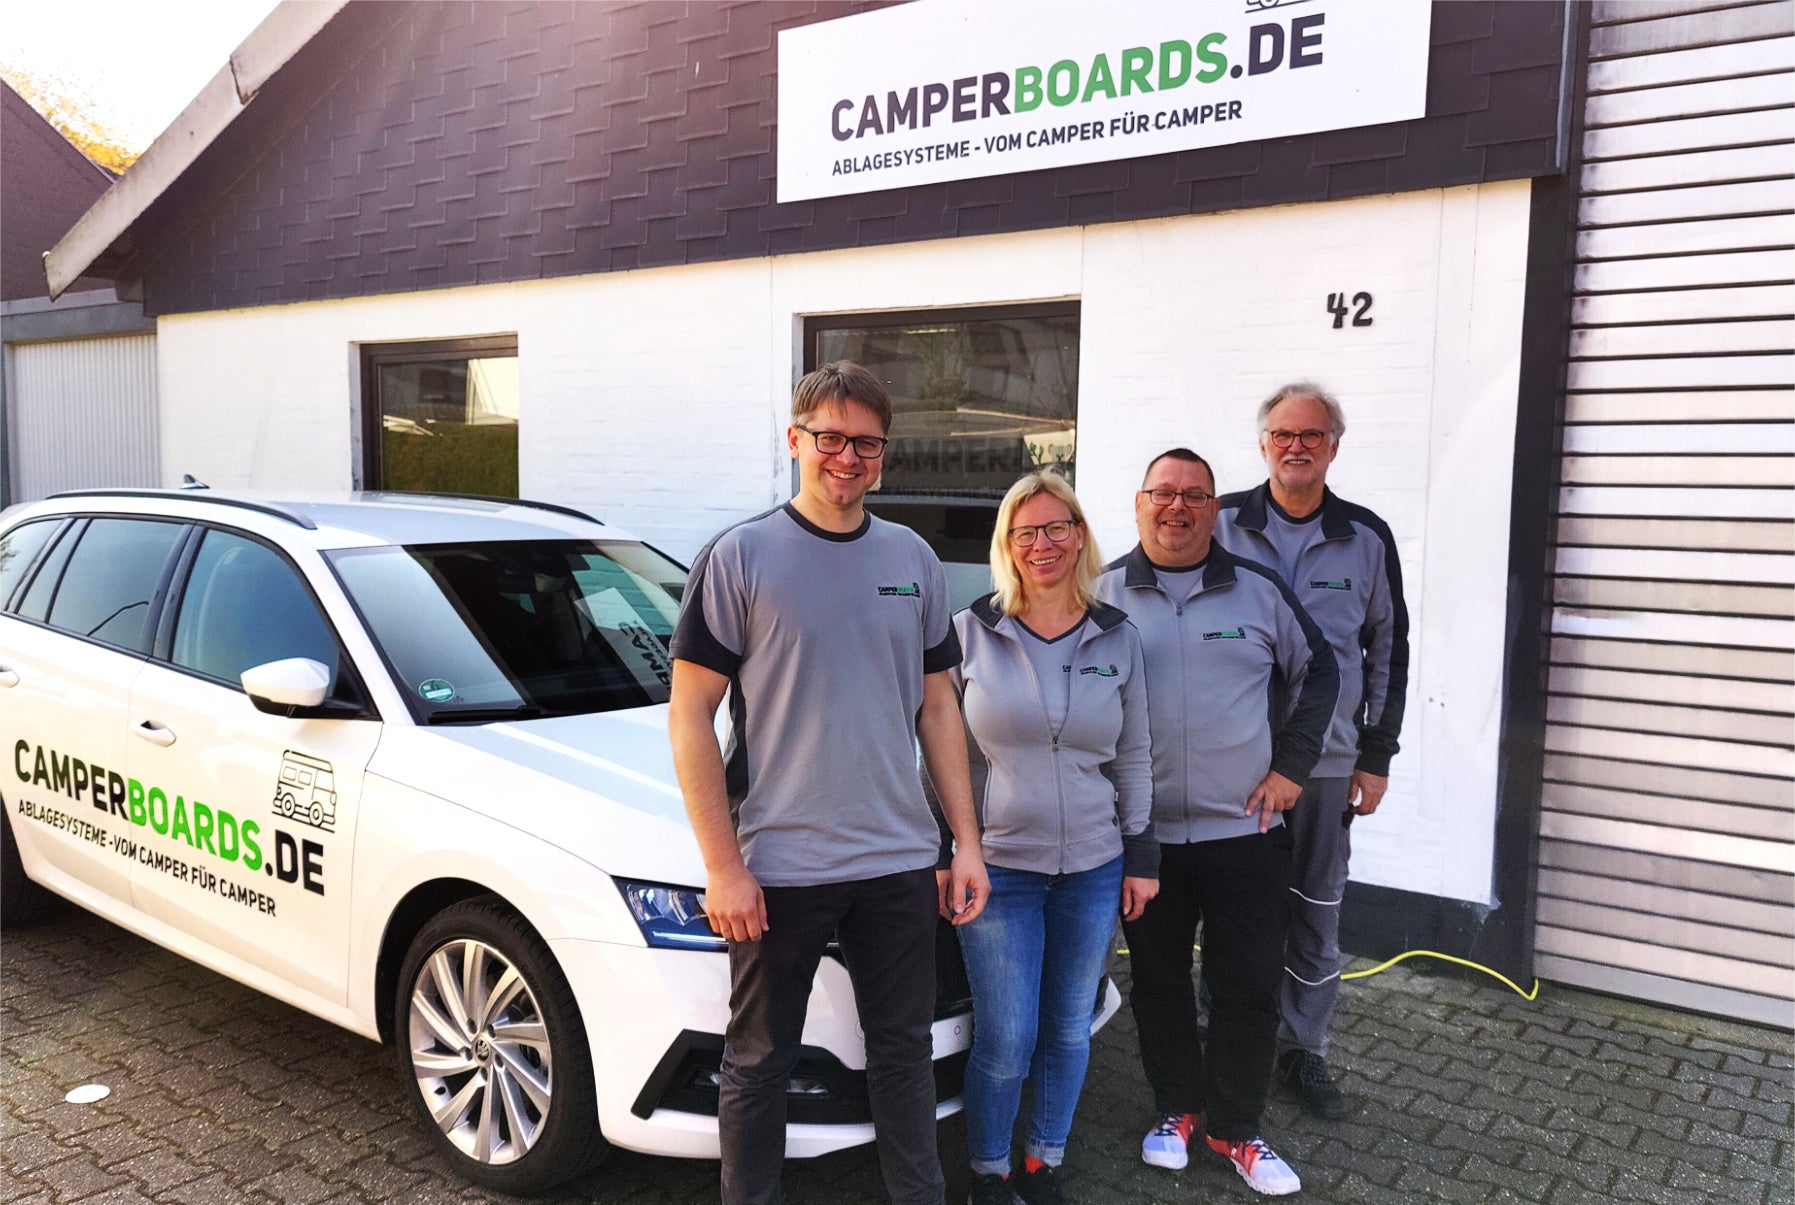 Camperboards grows and expands by moving to new location - significantly more space for warehousing, logistics and customer contact